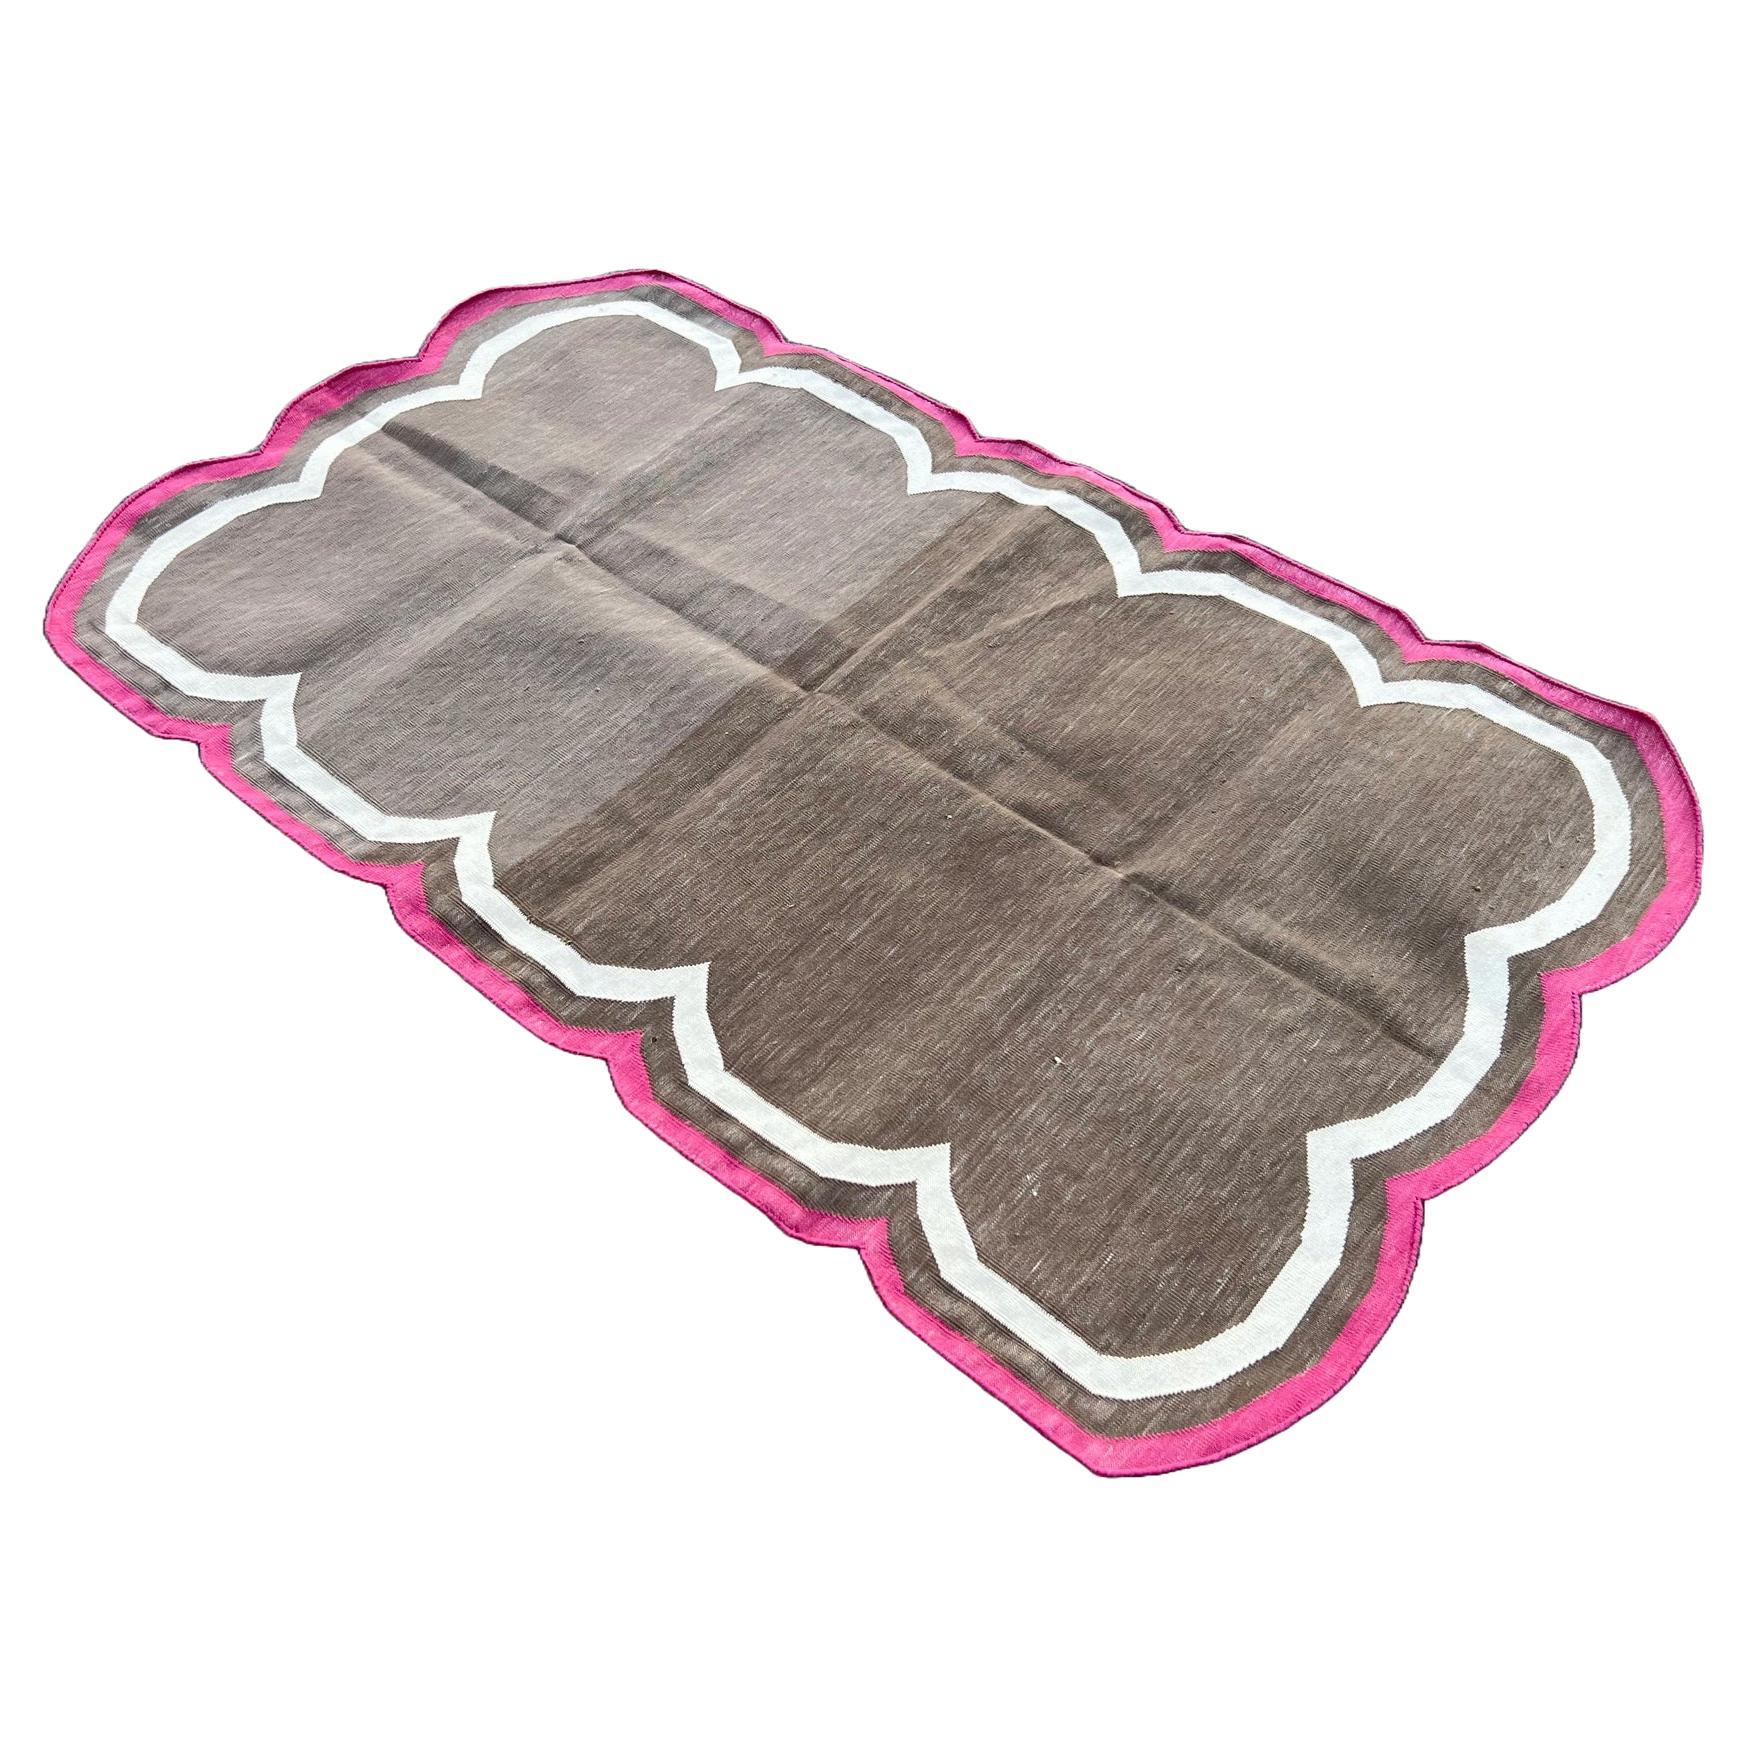 Handmade Cotton Area Flat Weave Rug, 3x5 Brown And Pink Scalloped Kilim Dhurrie For Sale